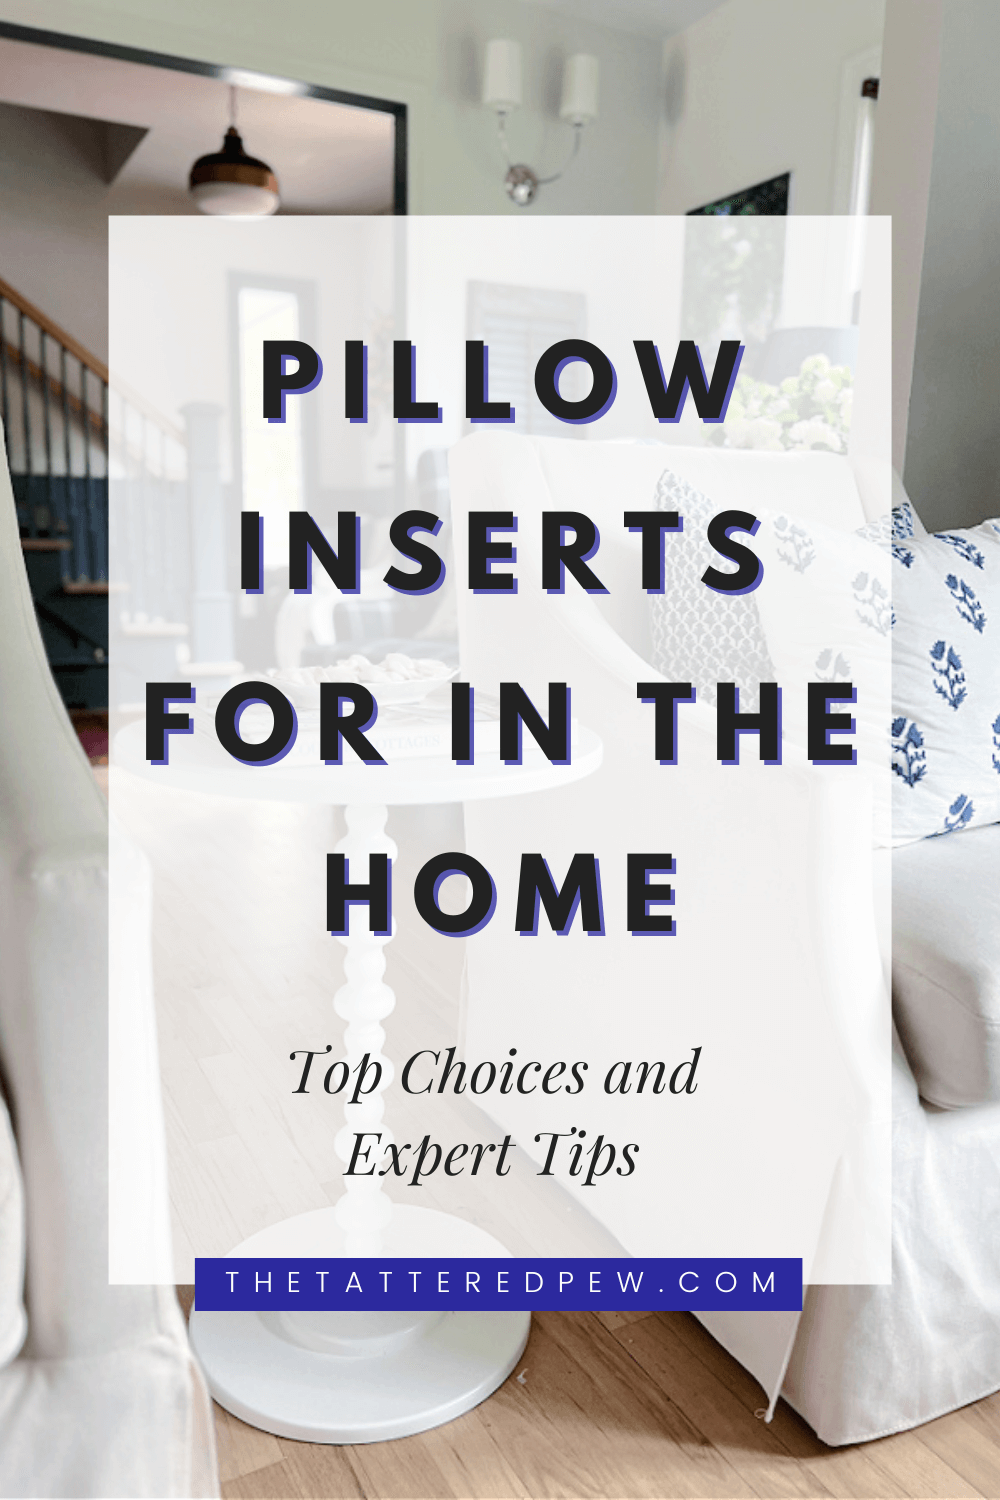 https://www.thetatteredpew.com/wp-content/uploads/pillow-inserts-for-the-home-Top-Choices-and-Expert-Tips-1.png